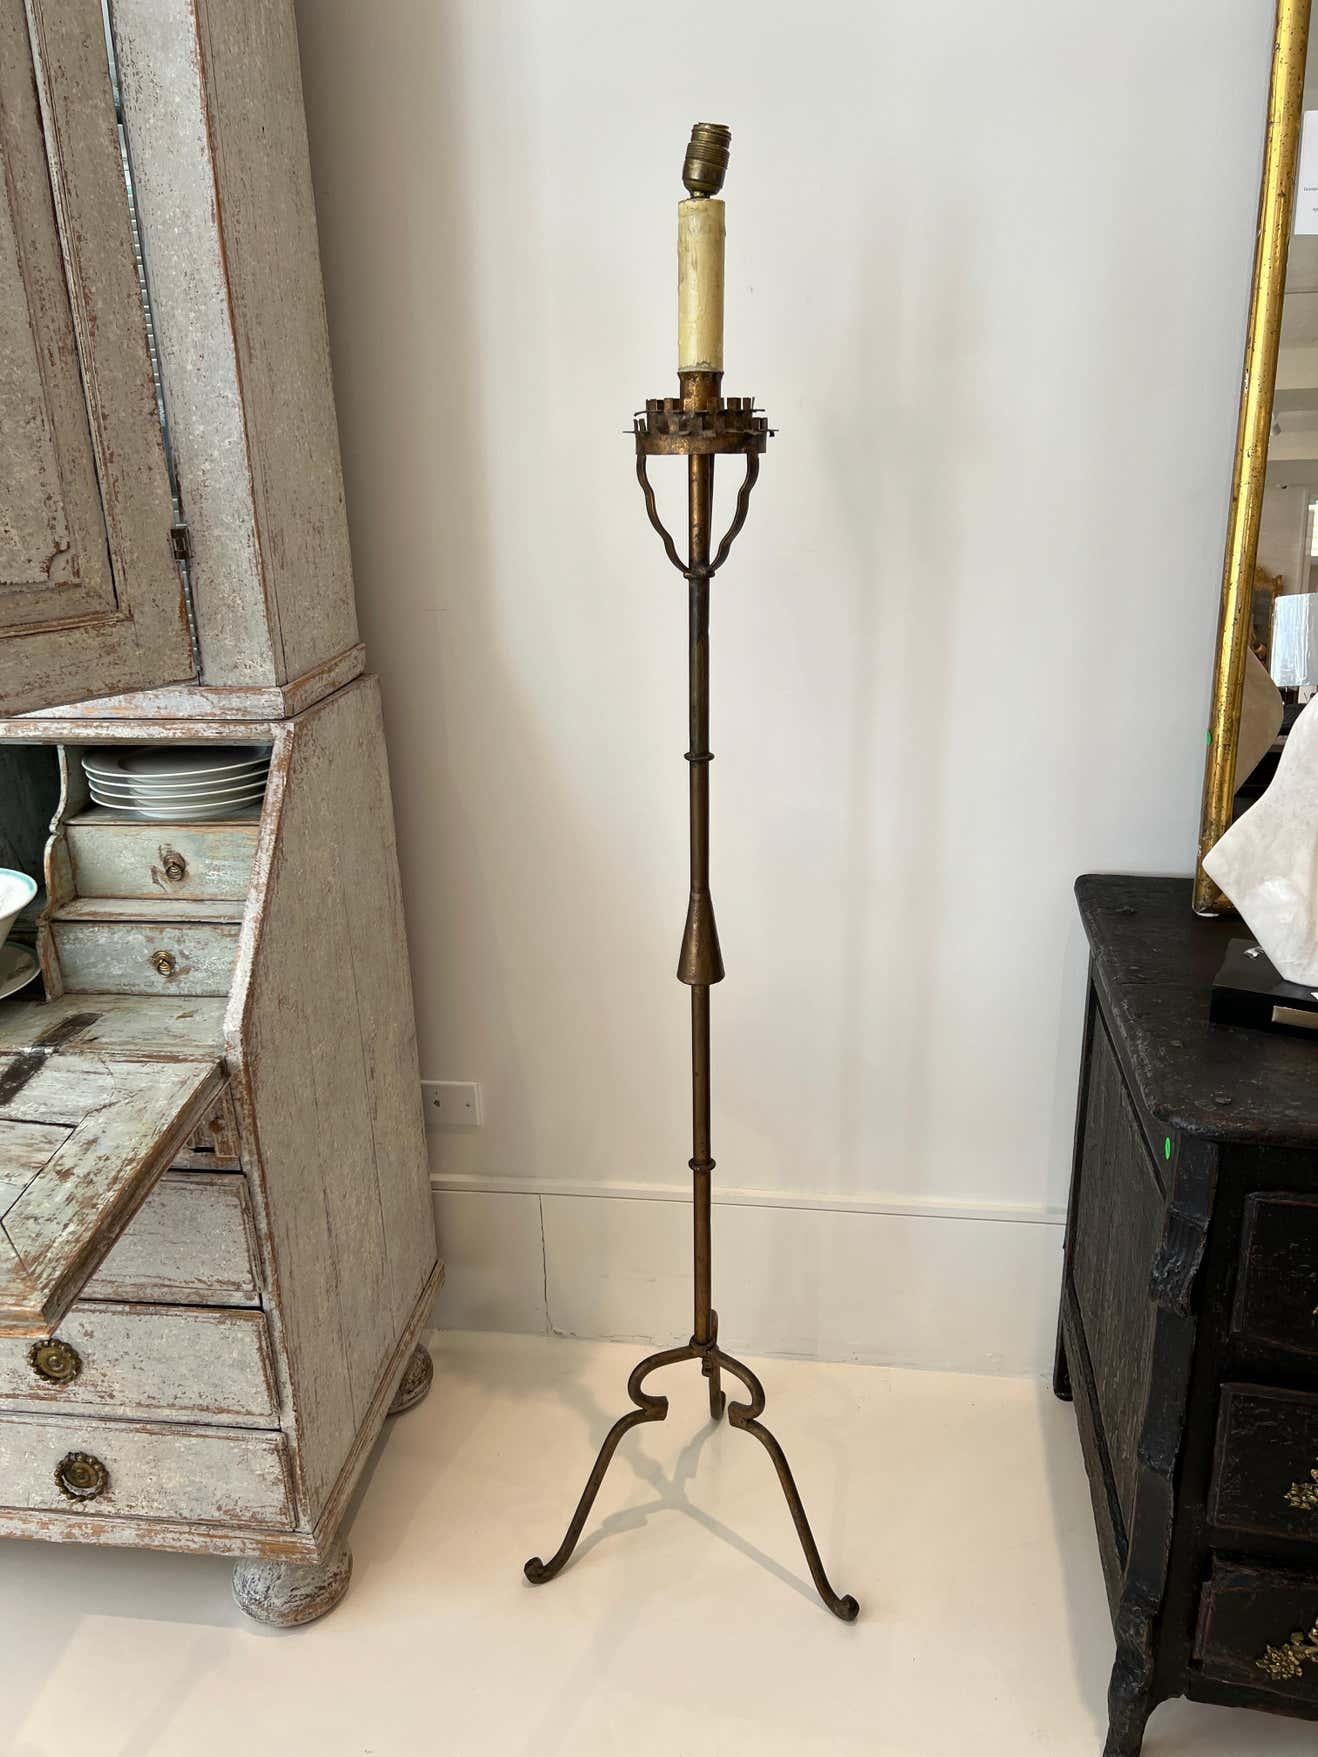 Lovely gilded floor lamp that would work in any decor. Needs to be rewired for US use.